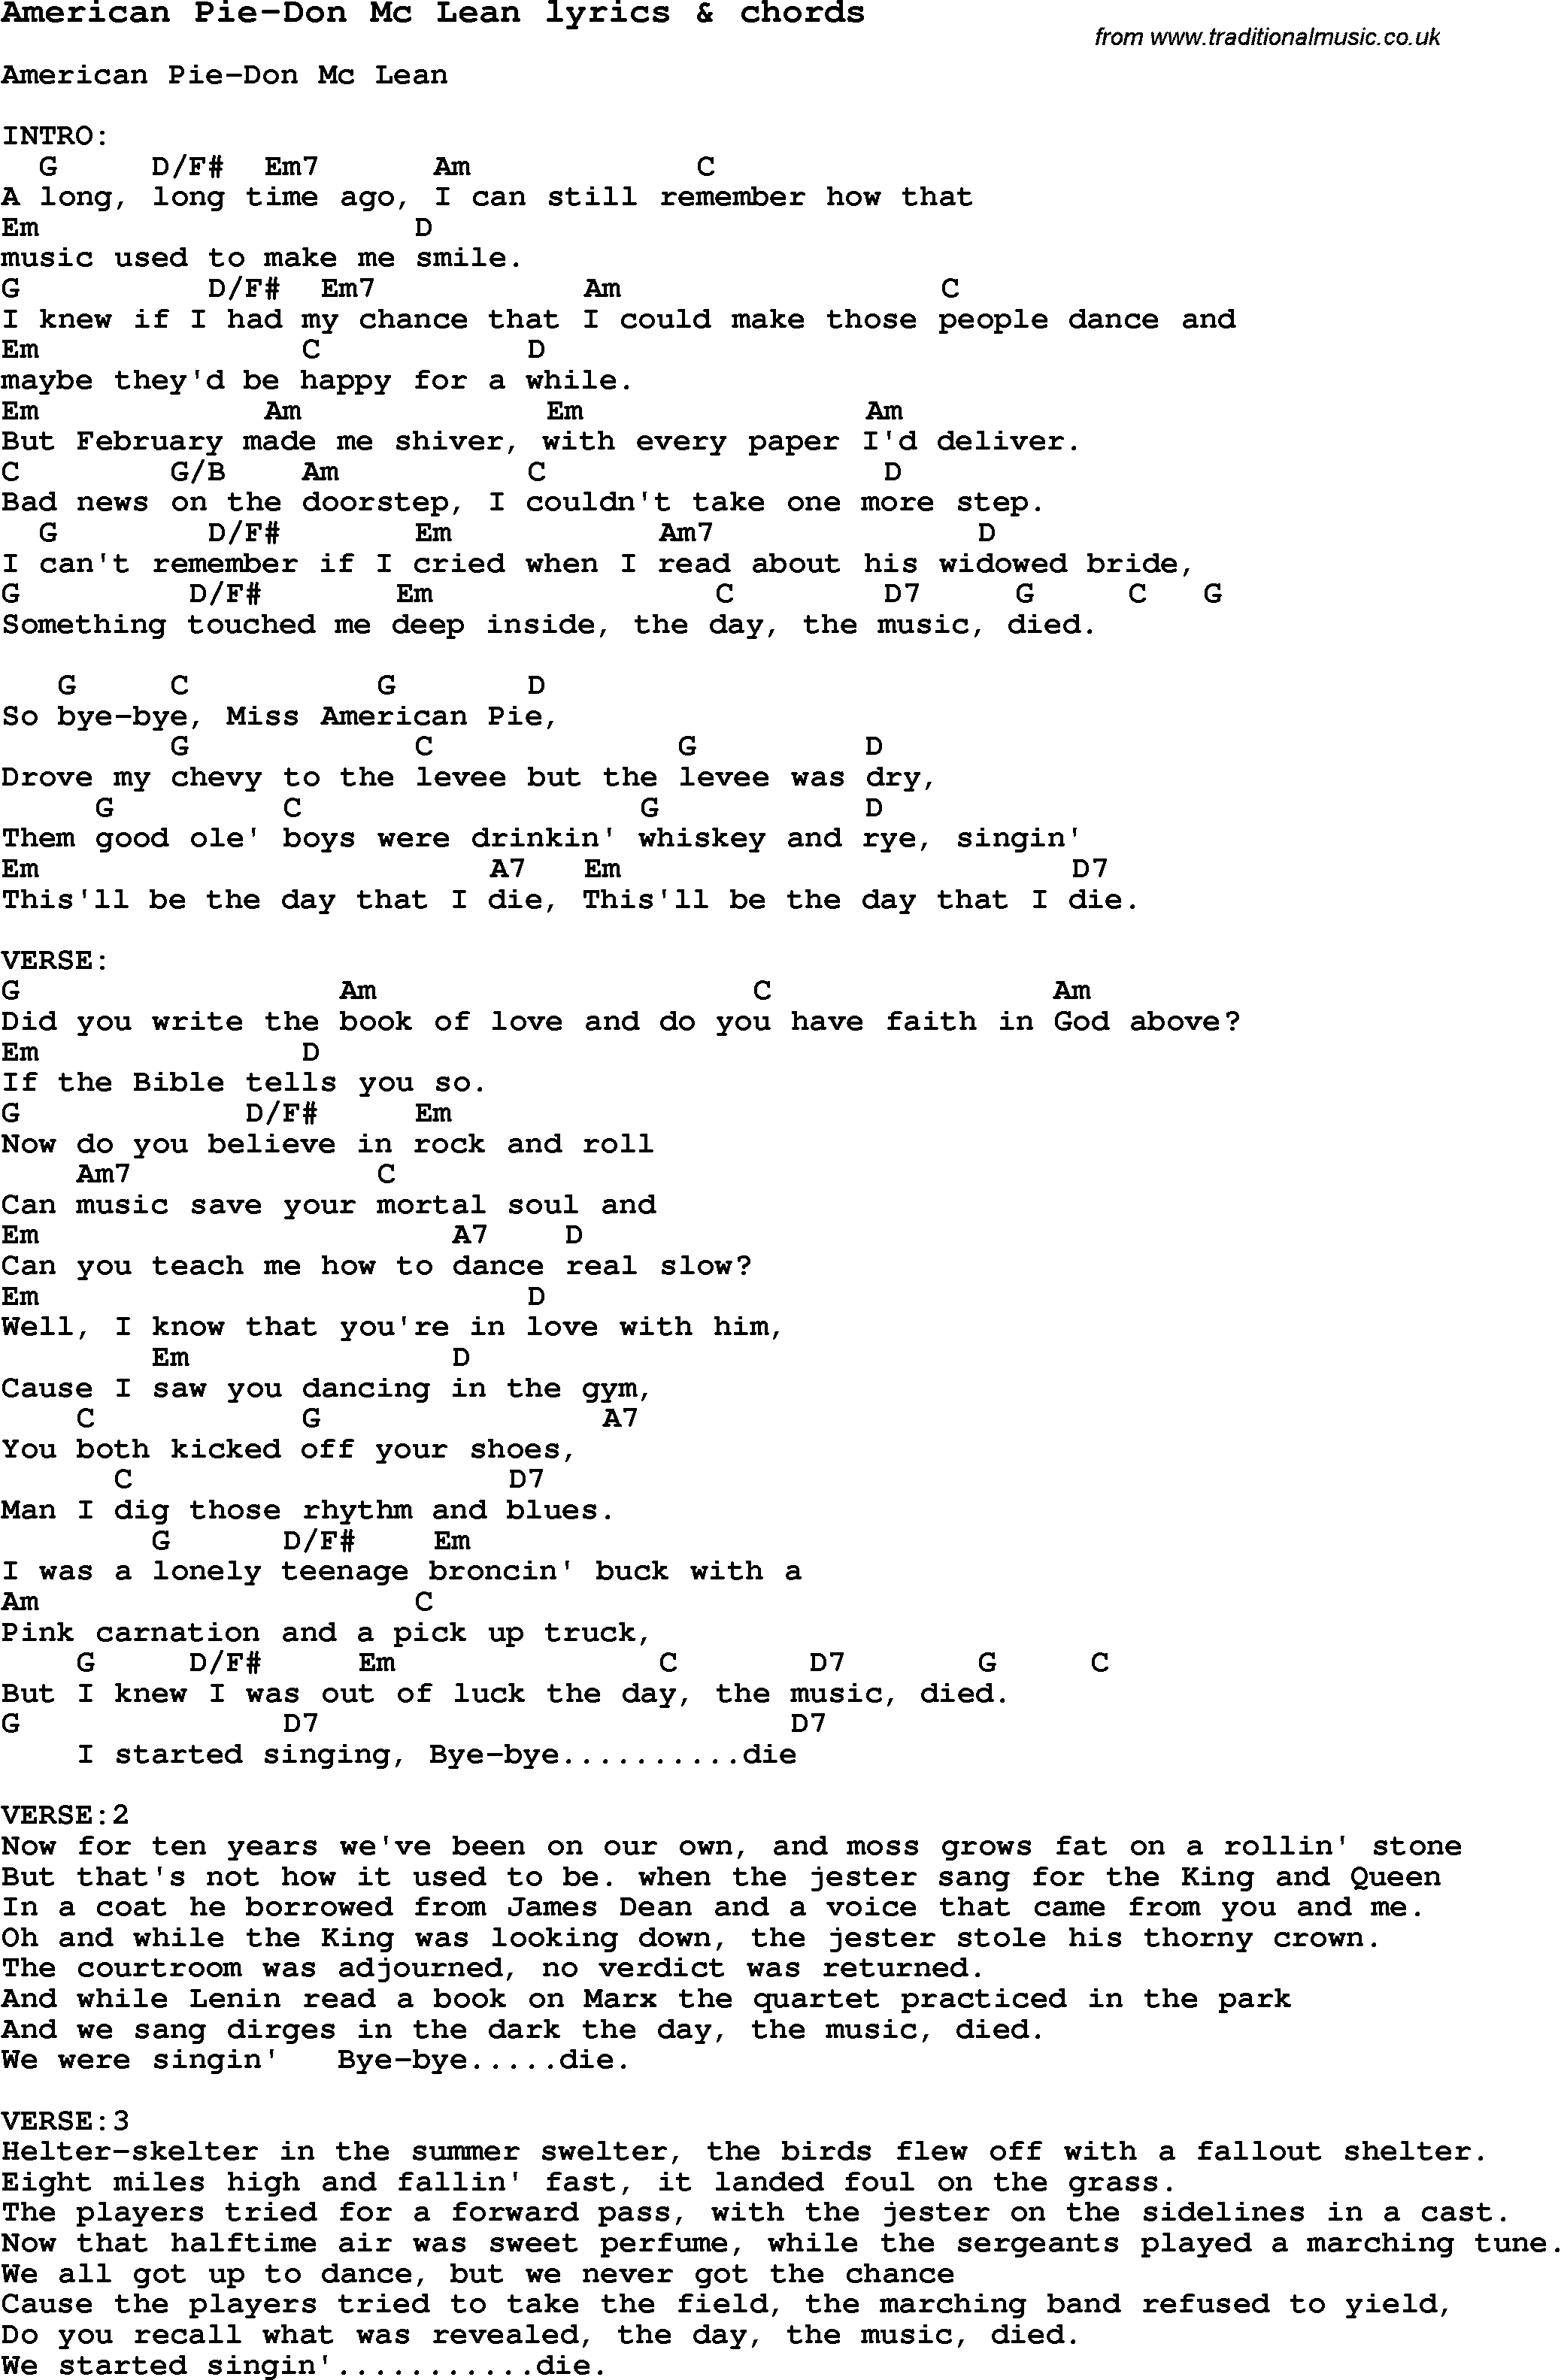 American Pie Chords Love Song Lyrics Foramerican Pie Don Mc Lean With Chords